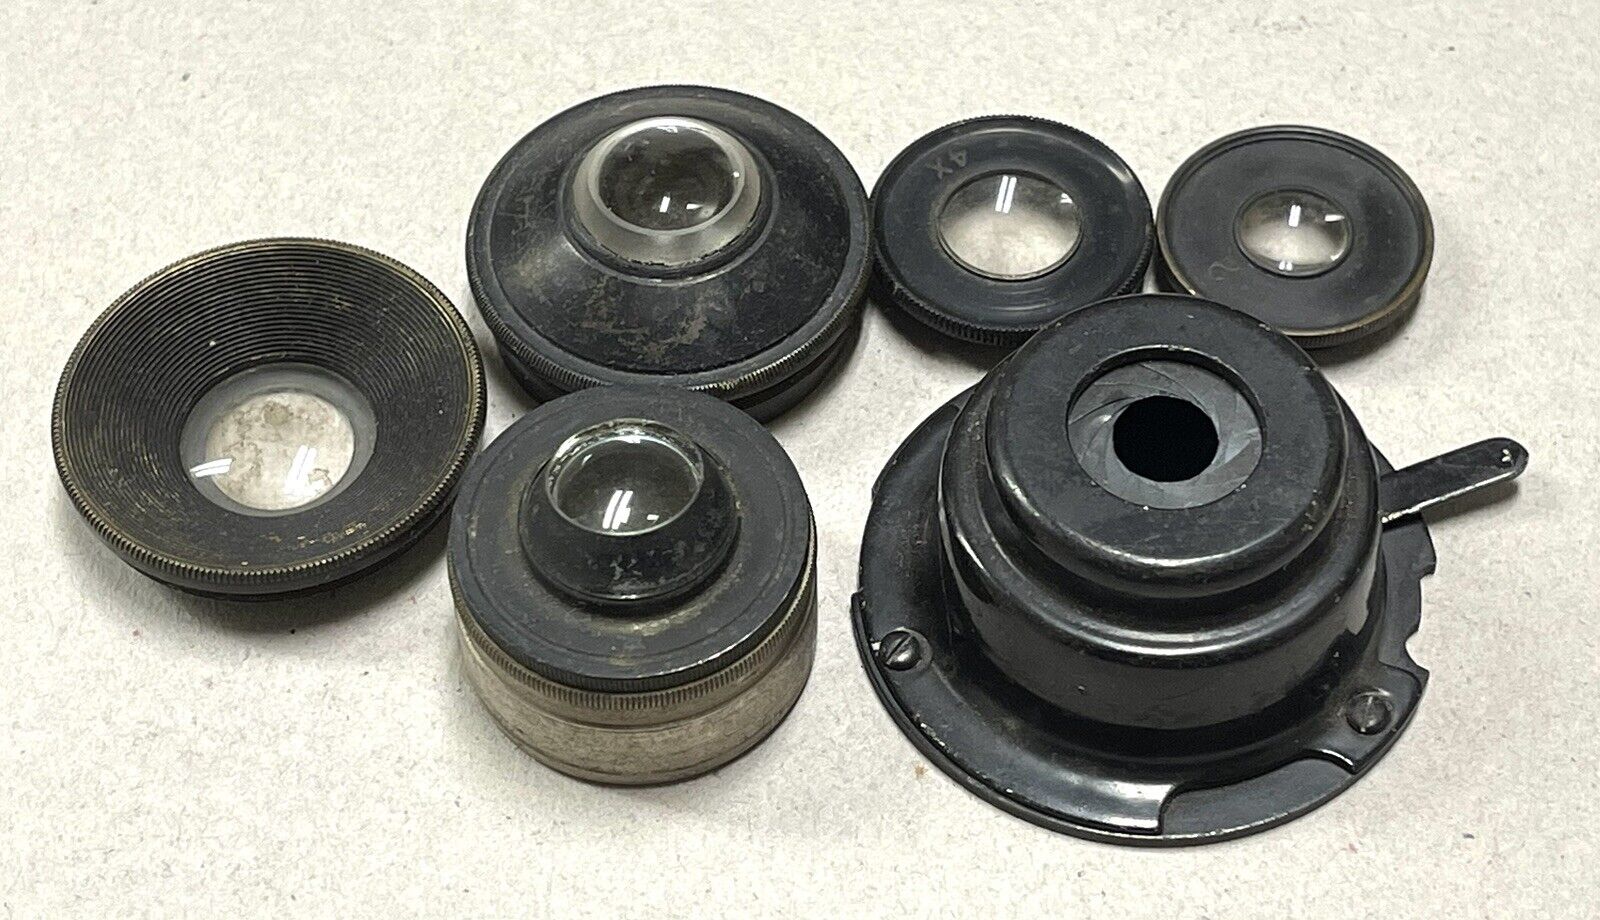 Lot of 6 Vintage Microscope Lens & Parts